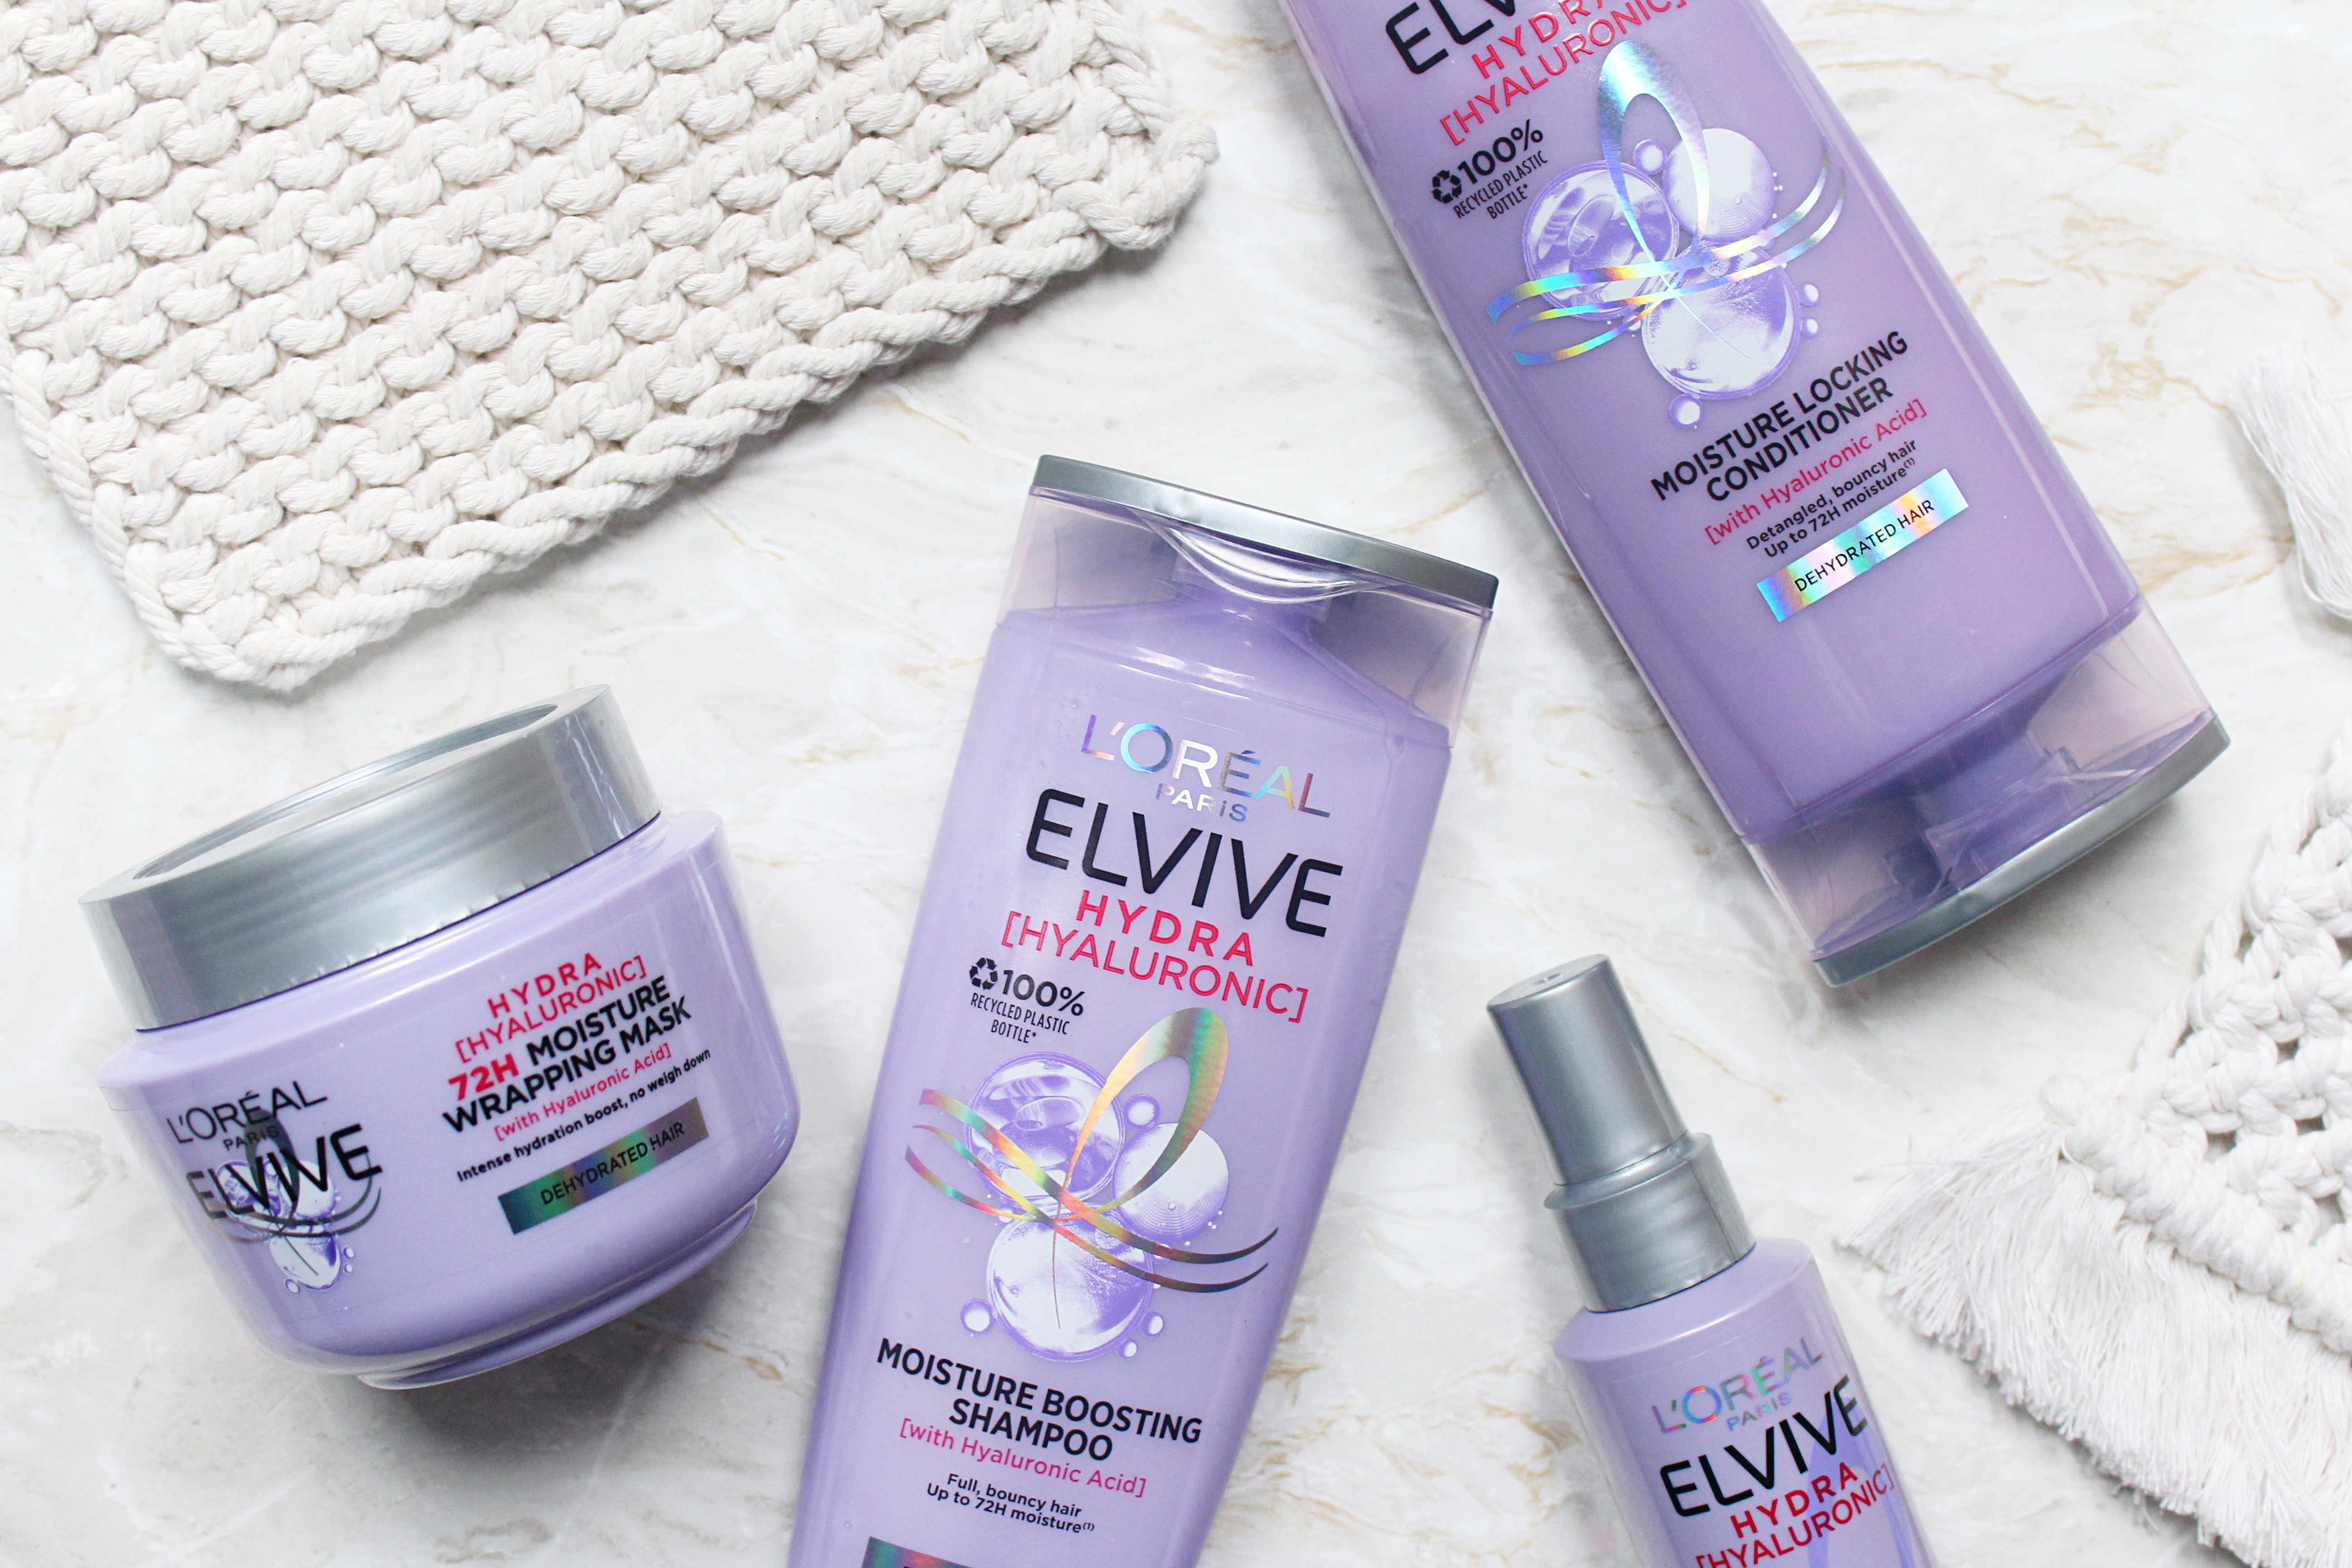 L'Oréal Elvive Hydra [Hyaluronic] New Hair Care Review